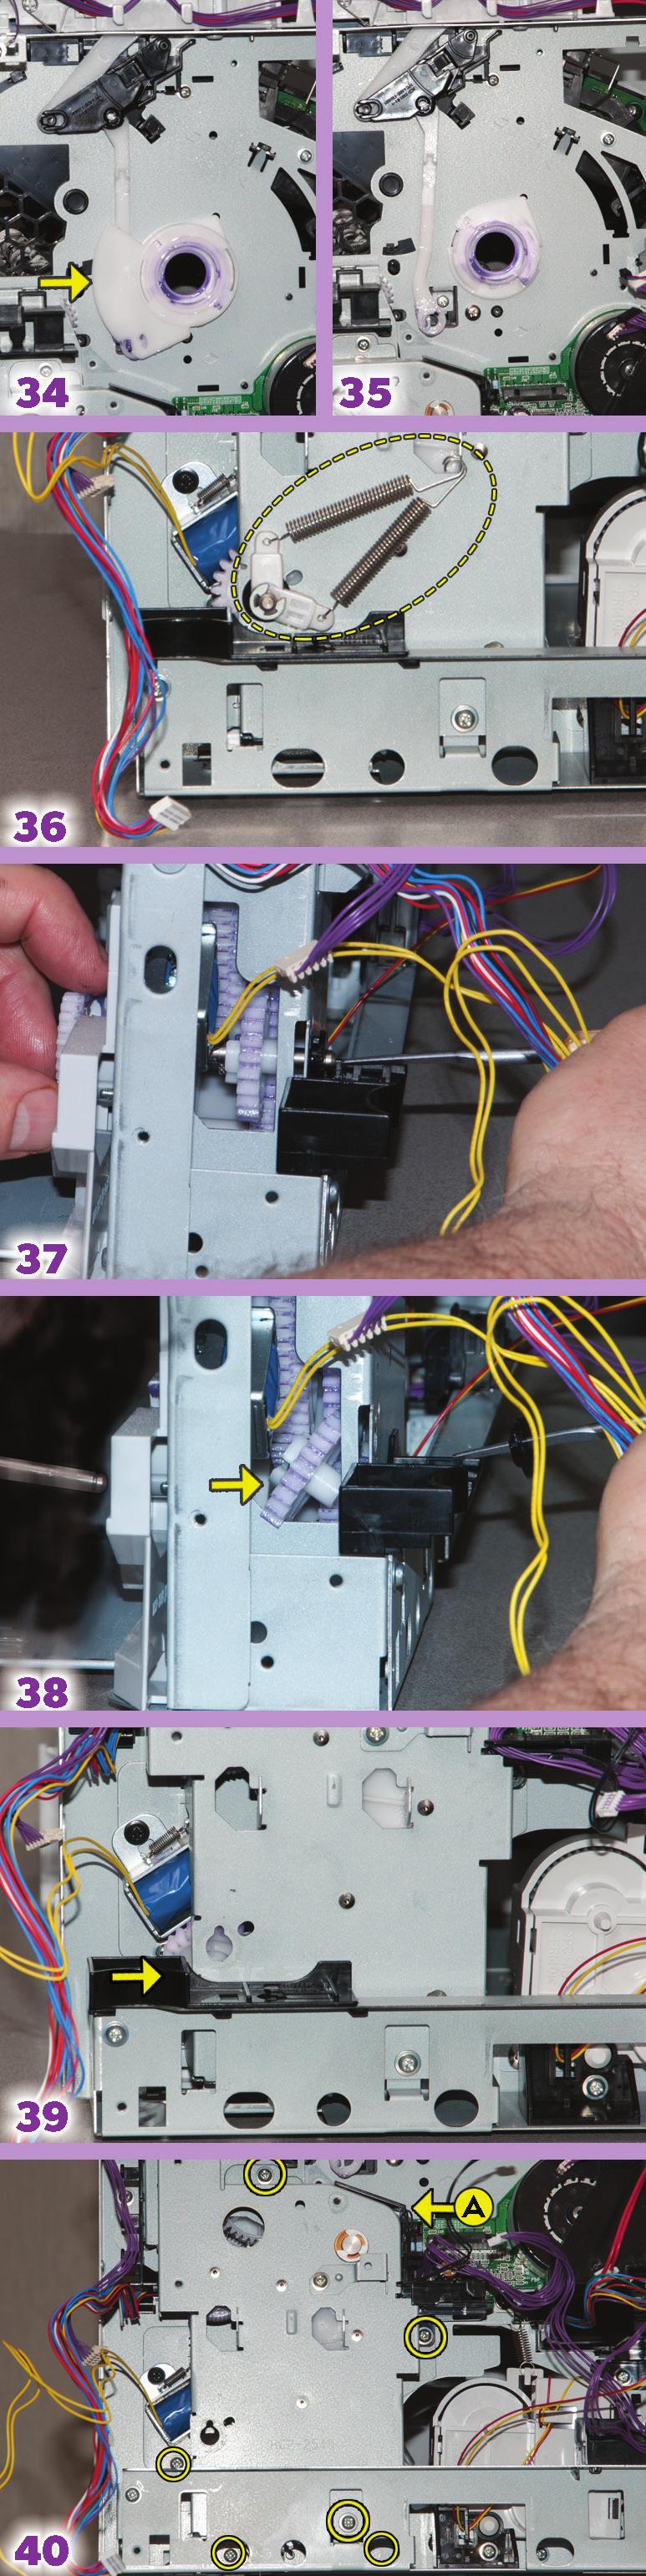 SERVICE ED GE, S UMMER 2014 from the right side of the cover (Fig. 7), and then push the arm down into the printer (remember to re-attach this arm when reinstalling the cover).